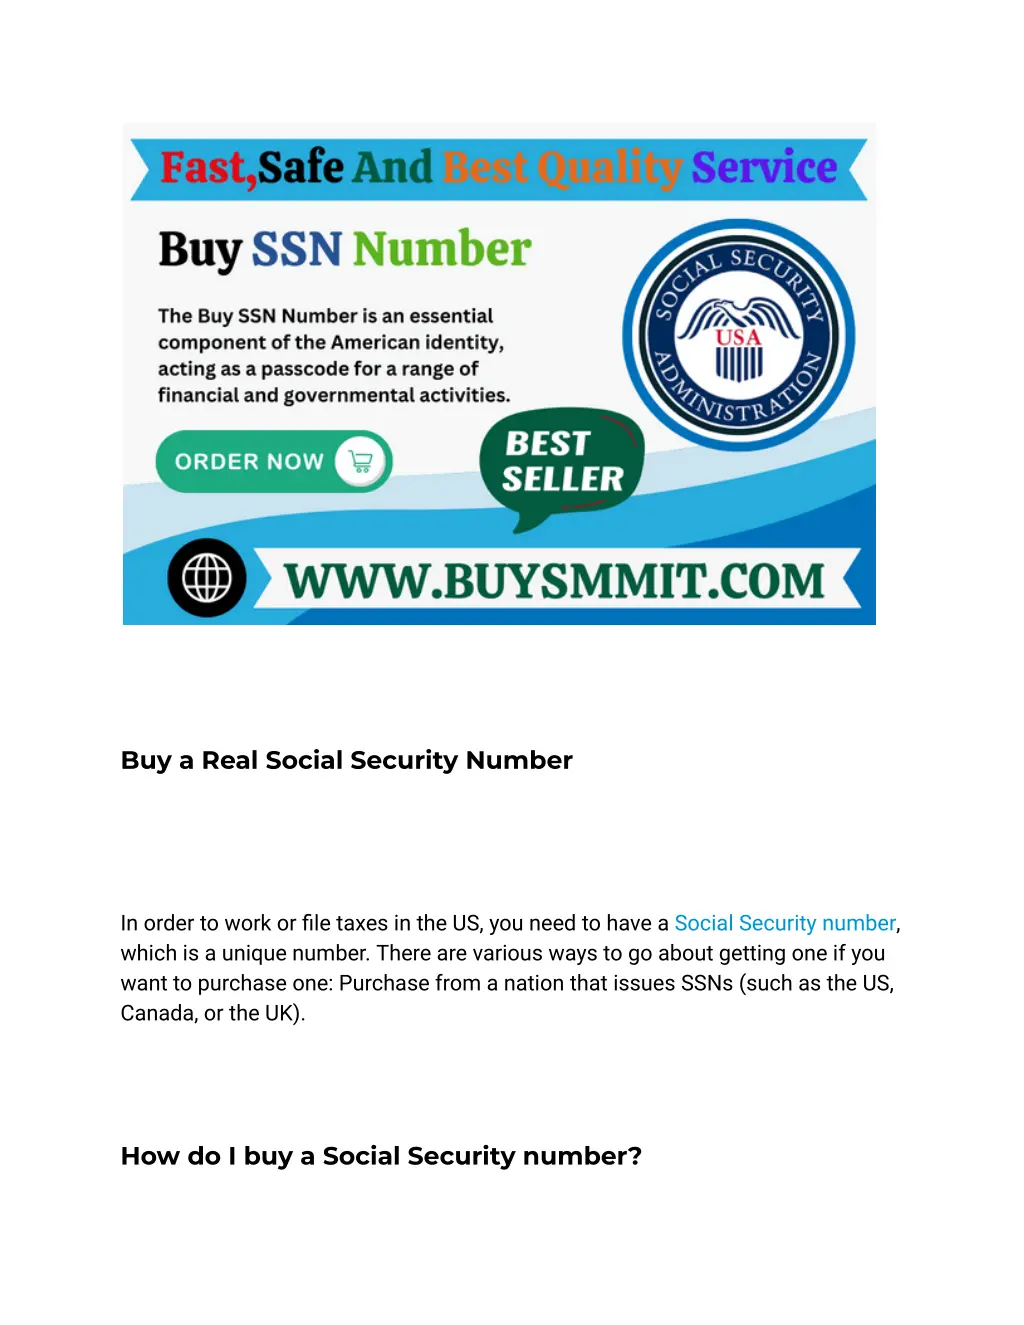 buy a real social security number